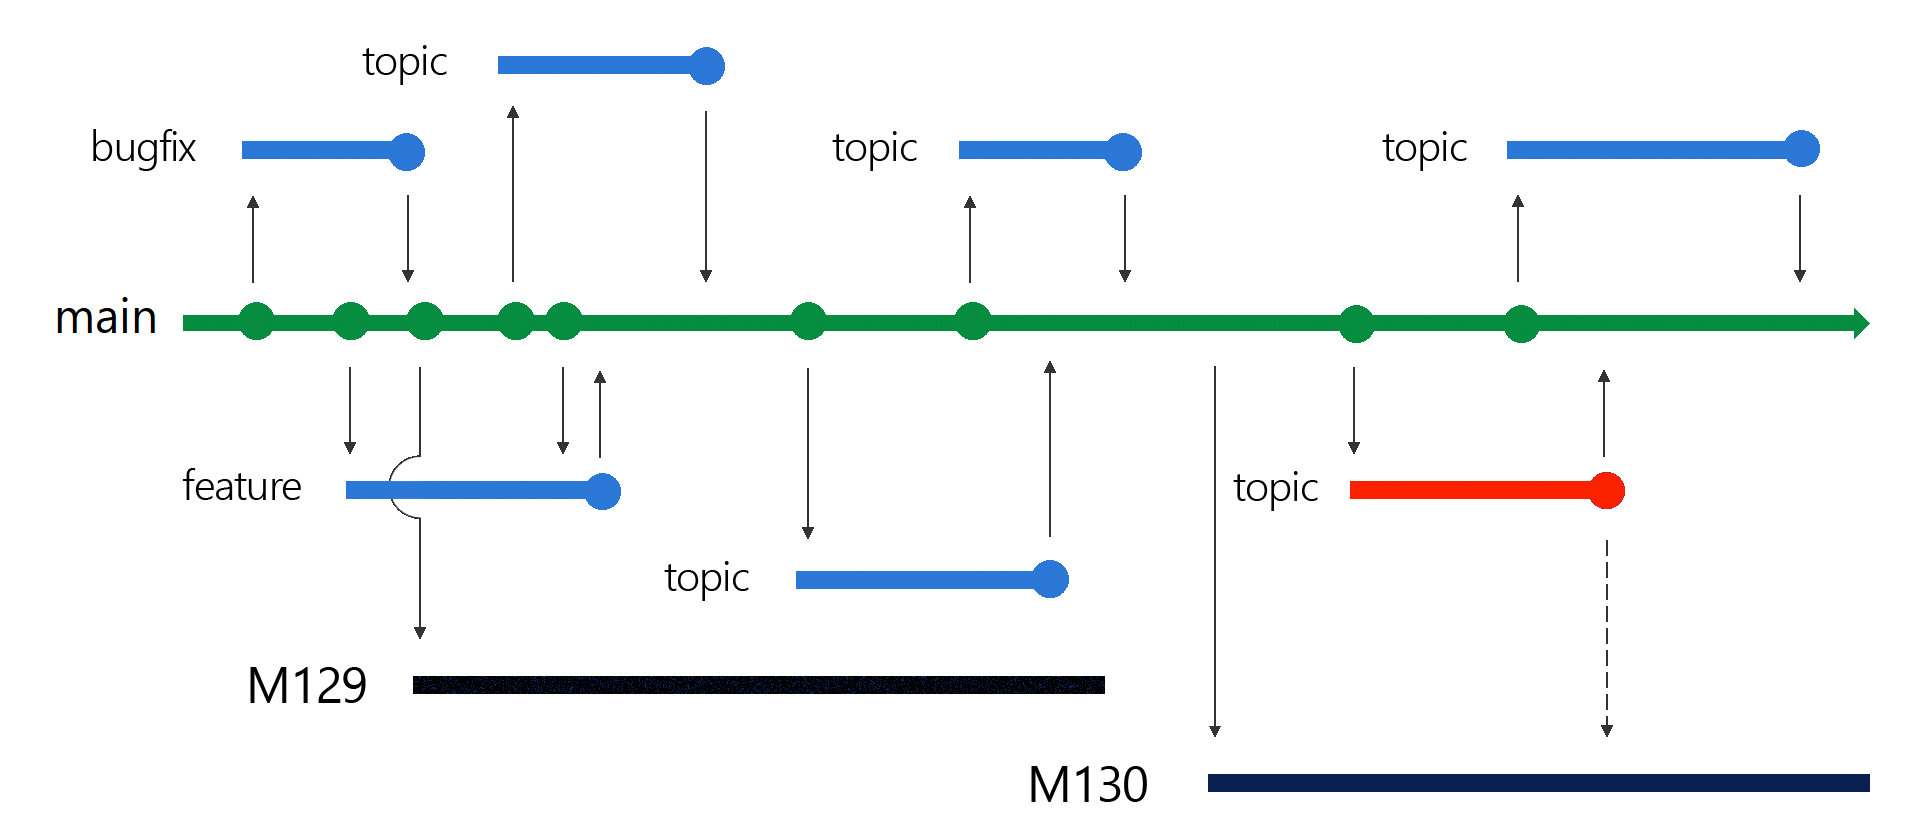 Diagram showing Git release branch structure.